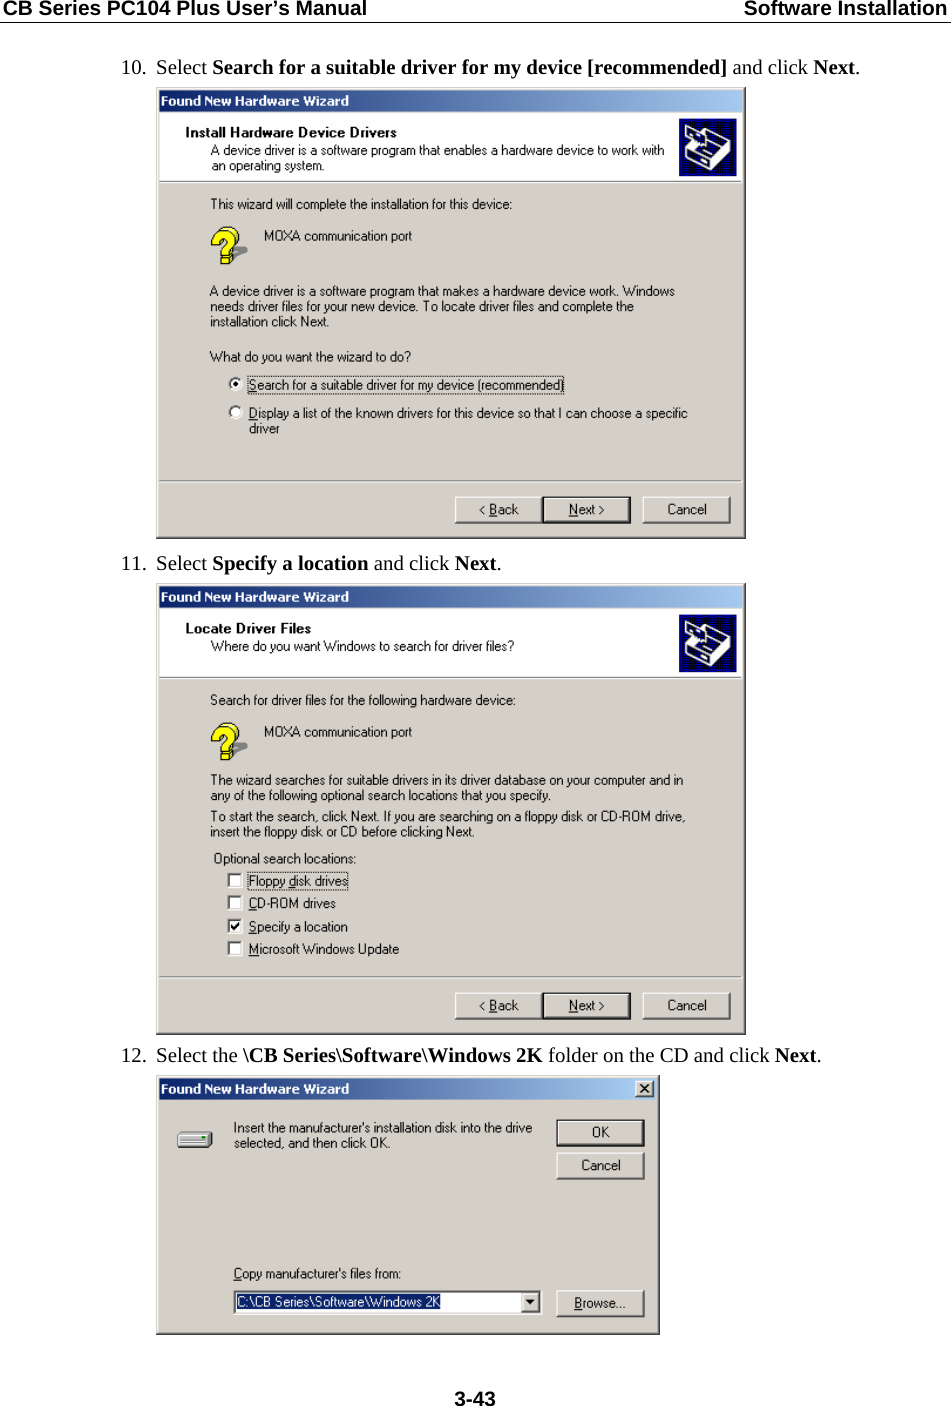 CB Series PC104 Plus User’s Manual  Software Installation 10. Select Search for a suitable driver for my device [recommended] and click Next.  11. Select Specify a location and click Next.  12. Select the \CB Series\Software\Windows 2K folder on the CD and click Next.   3-43